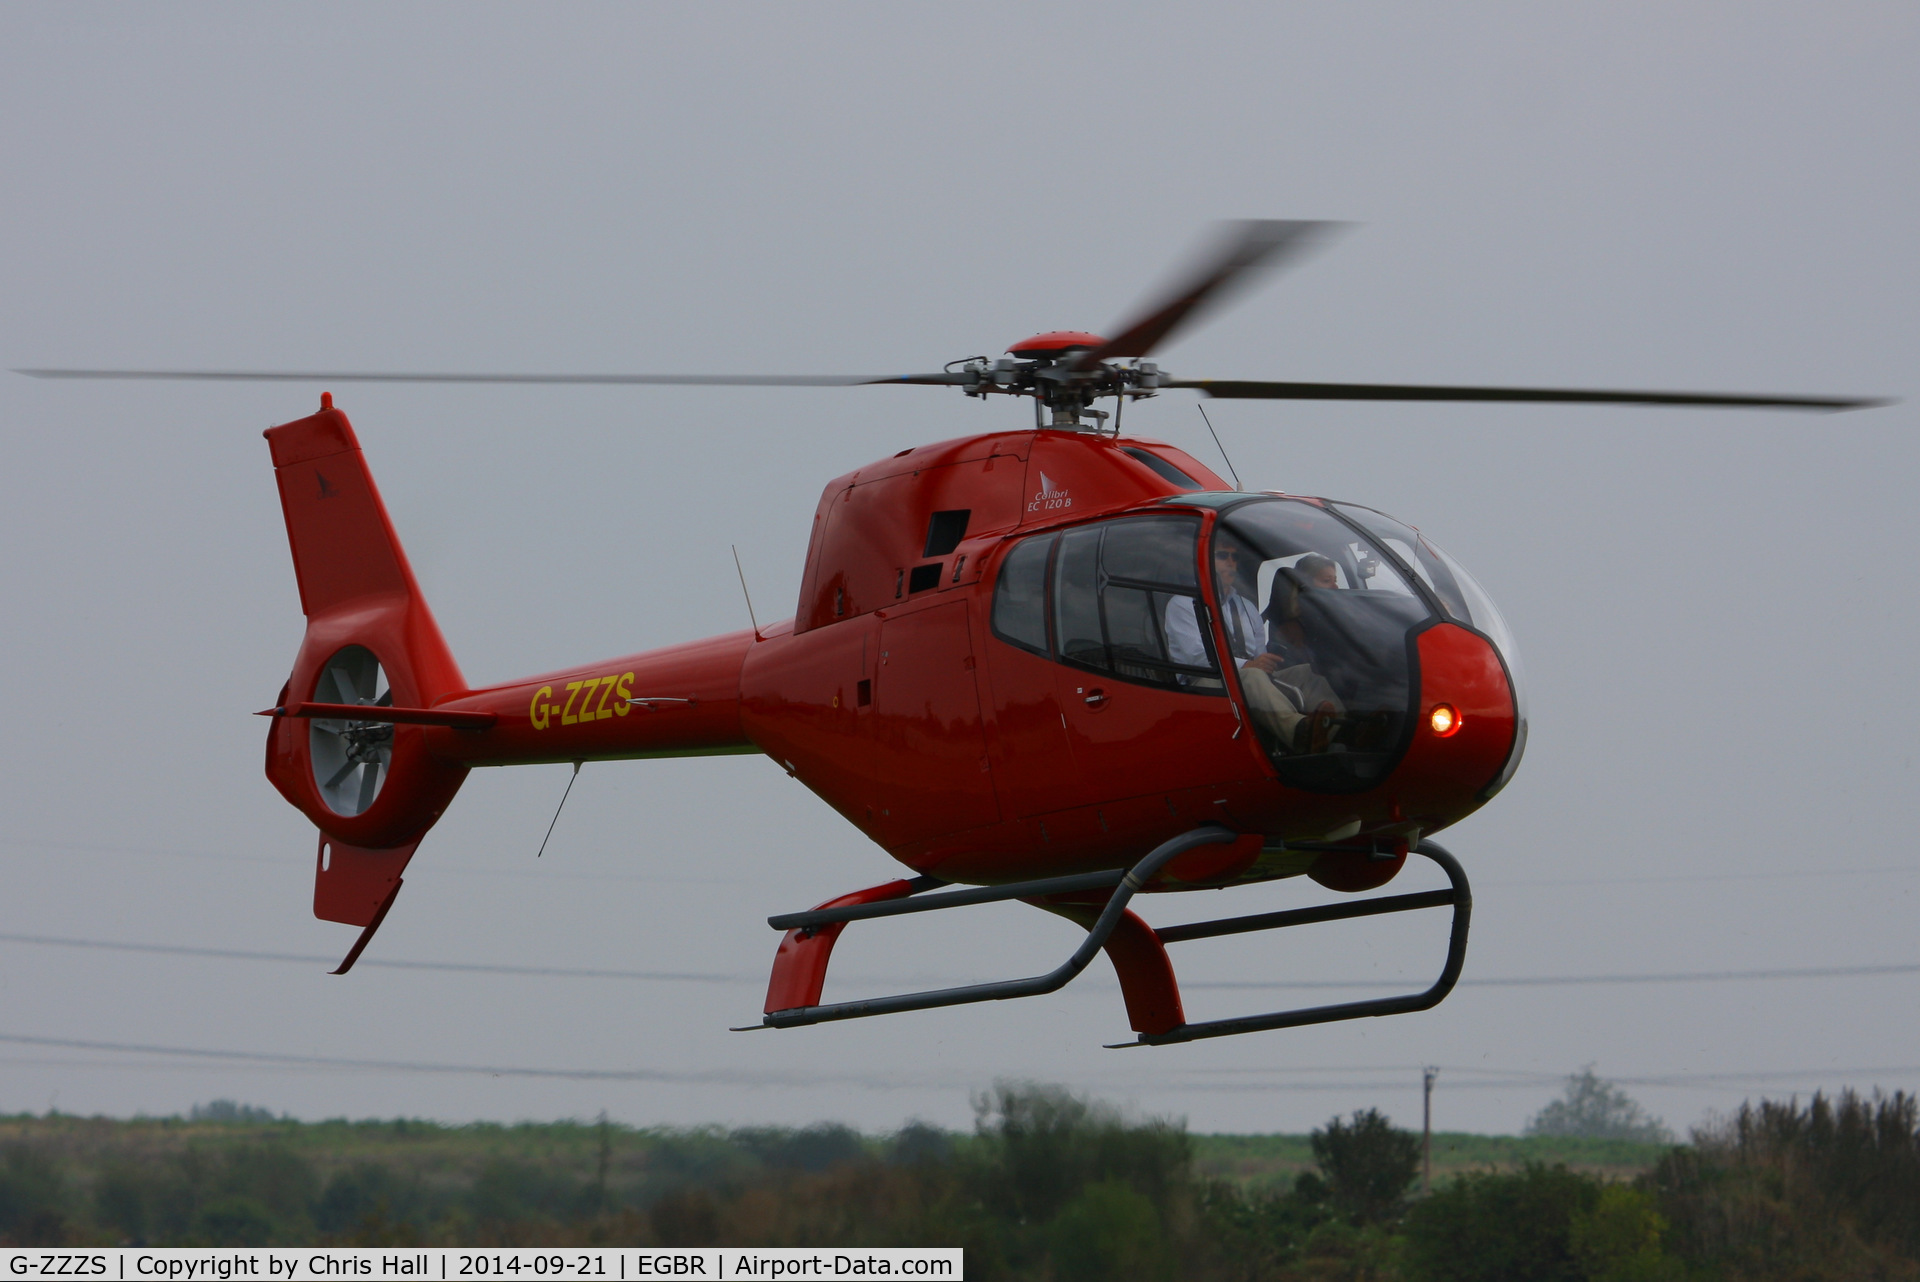 G-ZZZS, 2002 Eurocopter EC-120B Colibri C/N 1321, at Breighton's Heli Fly-in, 2014